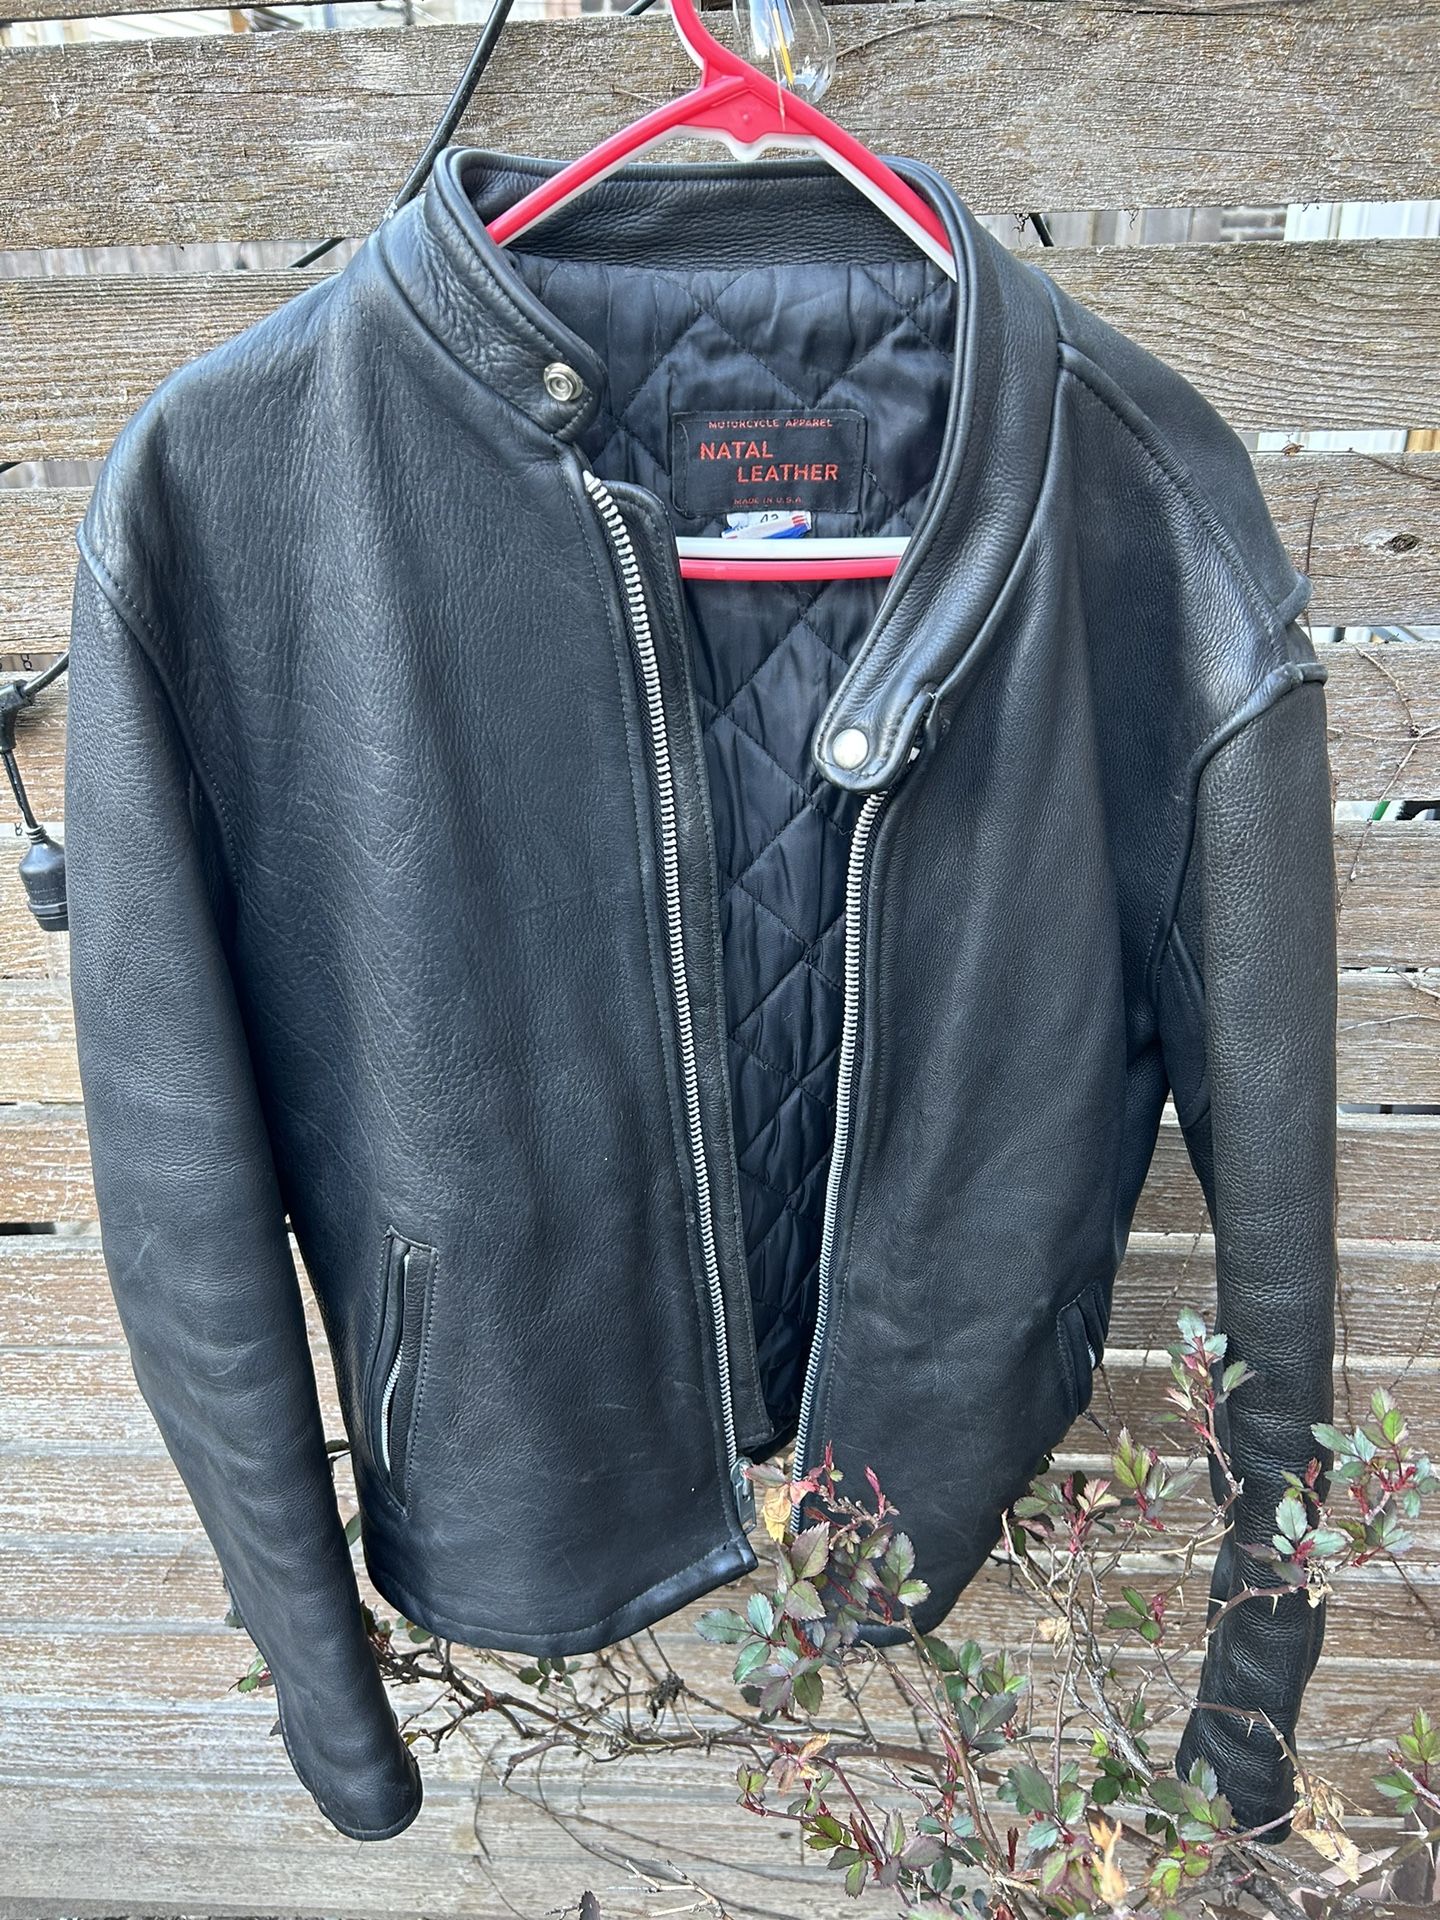 Natal Leather High-Quality Leather Jacket